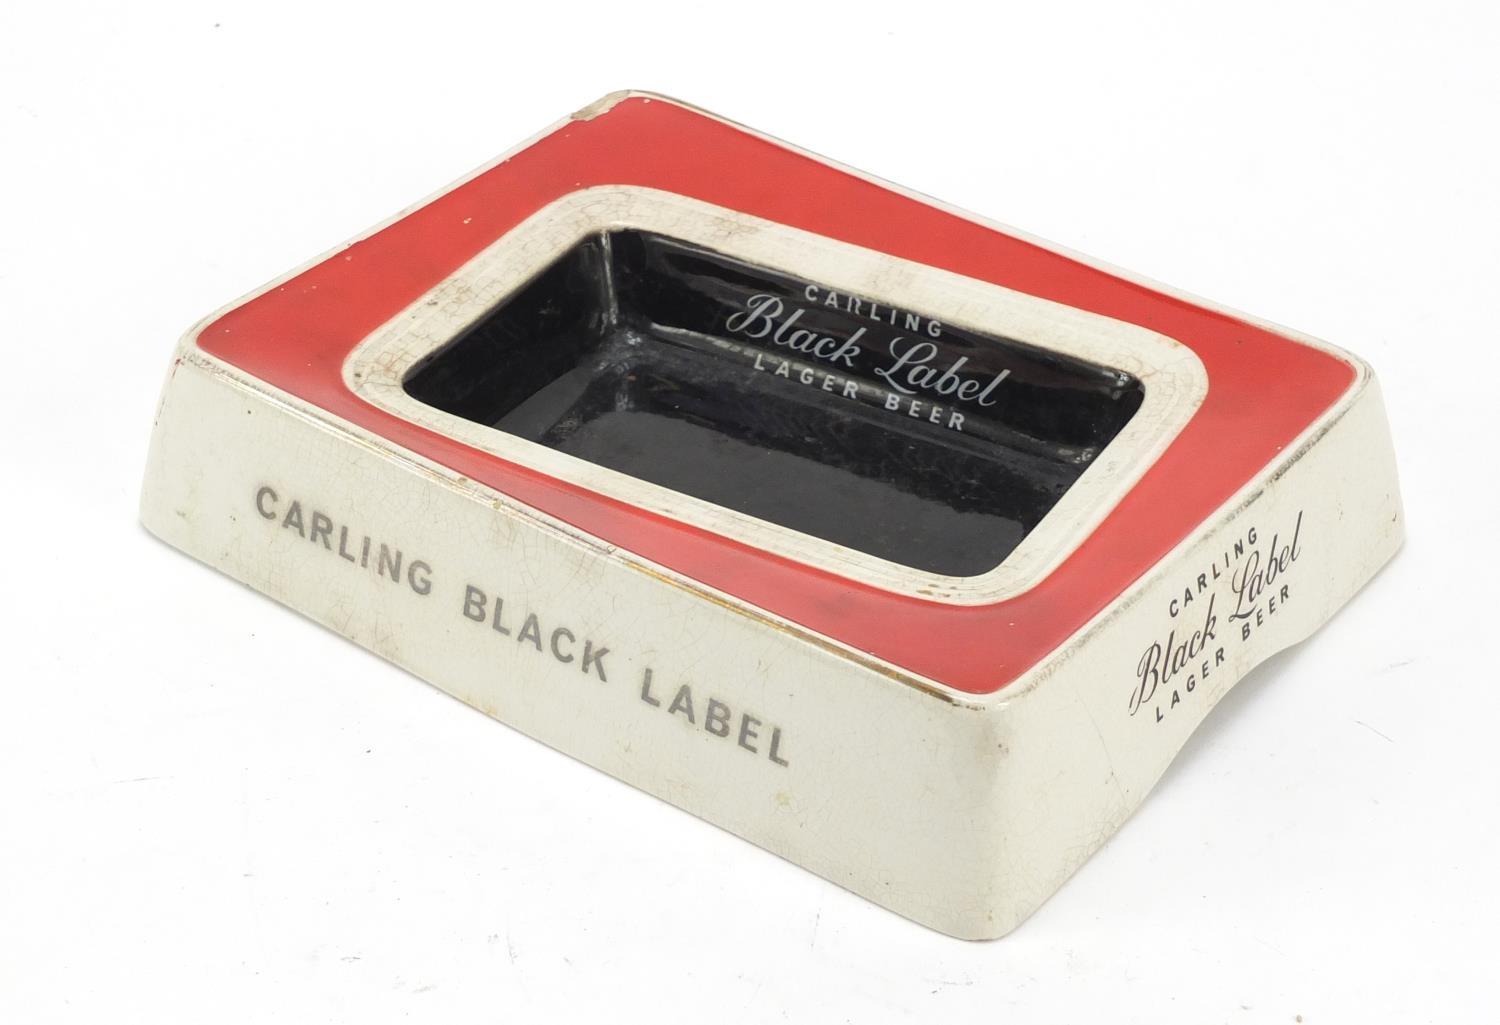 Gresley ware Carling Black Label advertising dish by TG Green, 22.5cm wide : For Further Condition